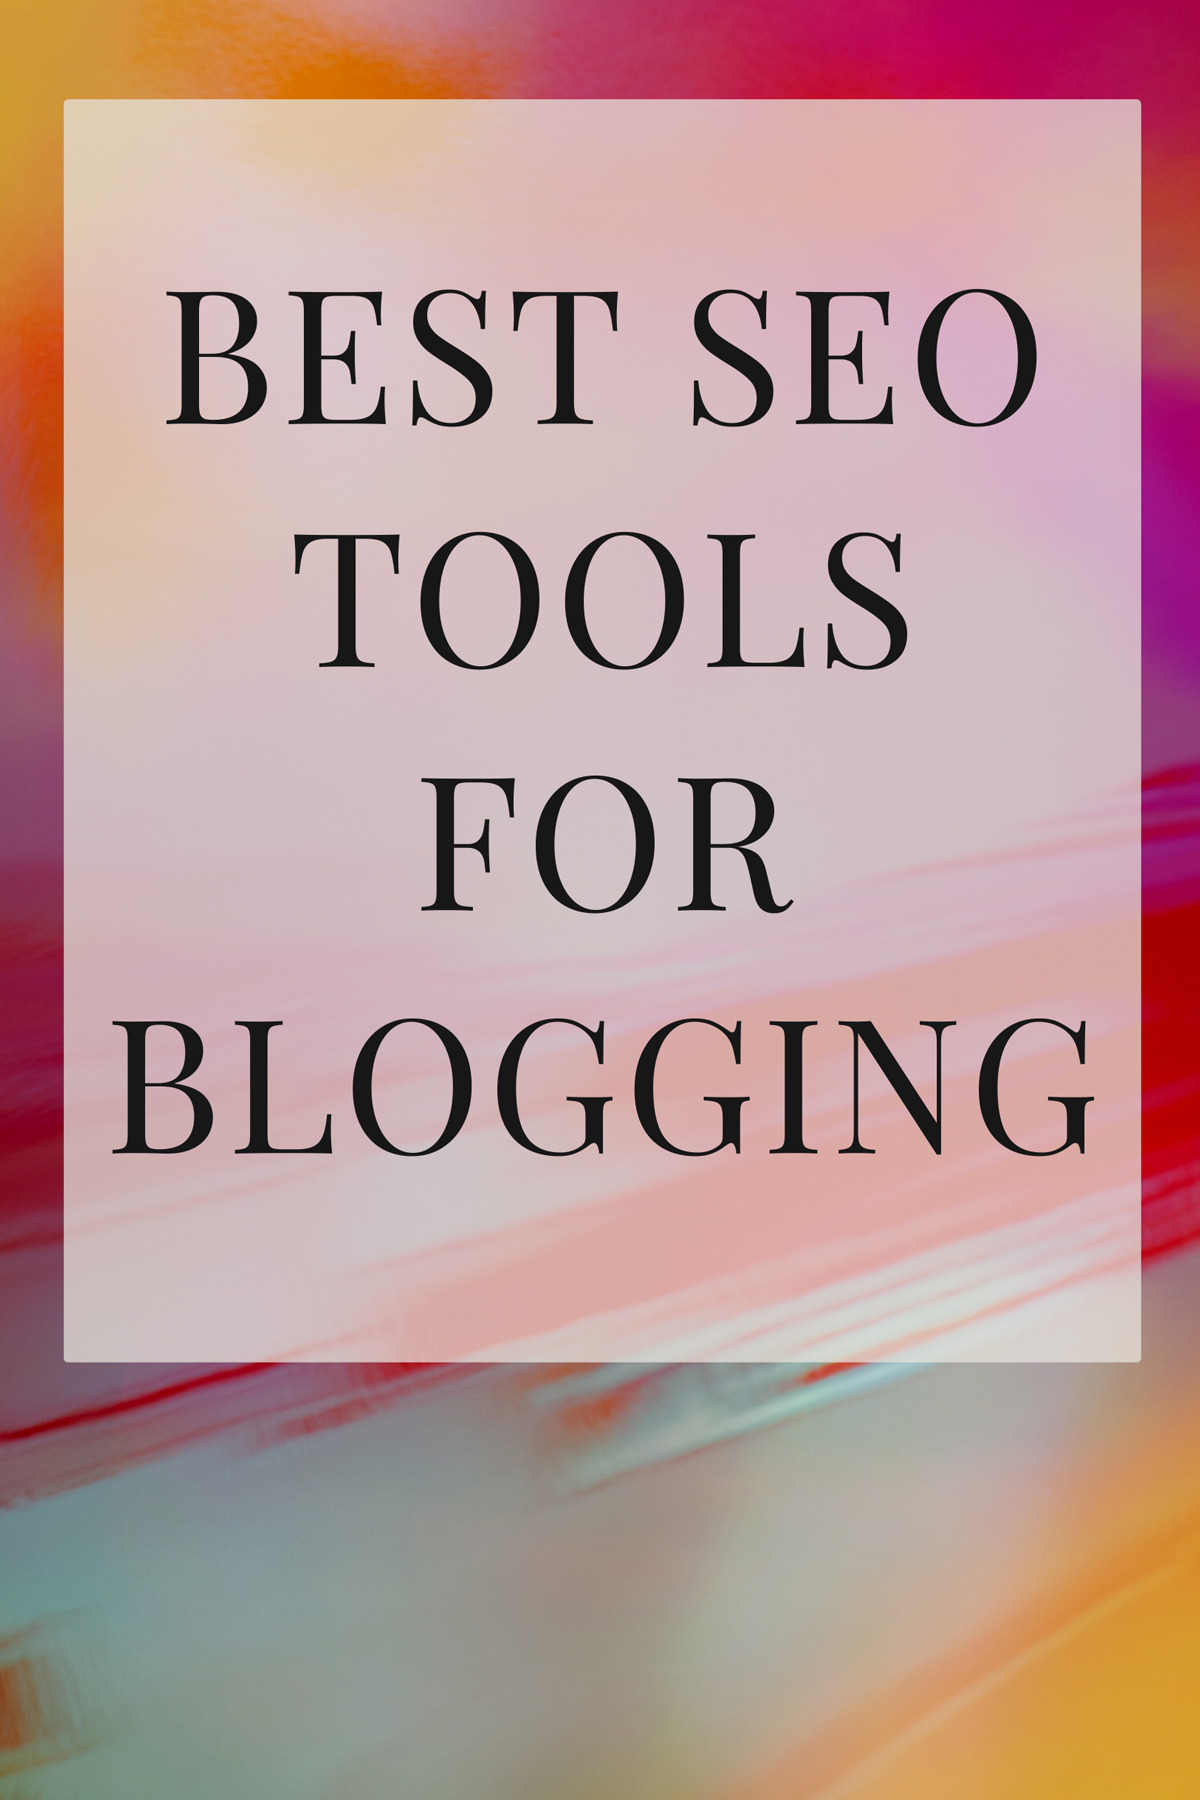 Best SEO tools for blogging